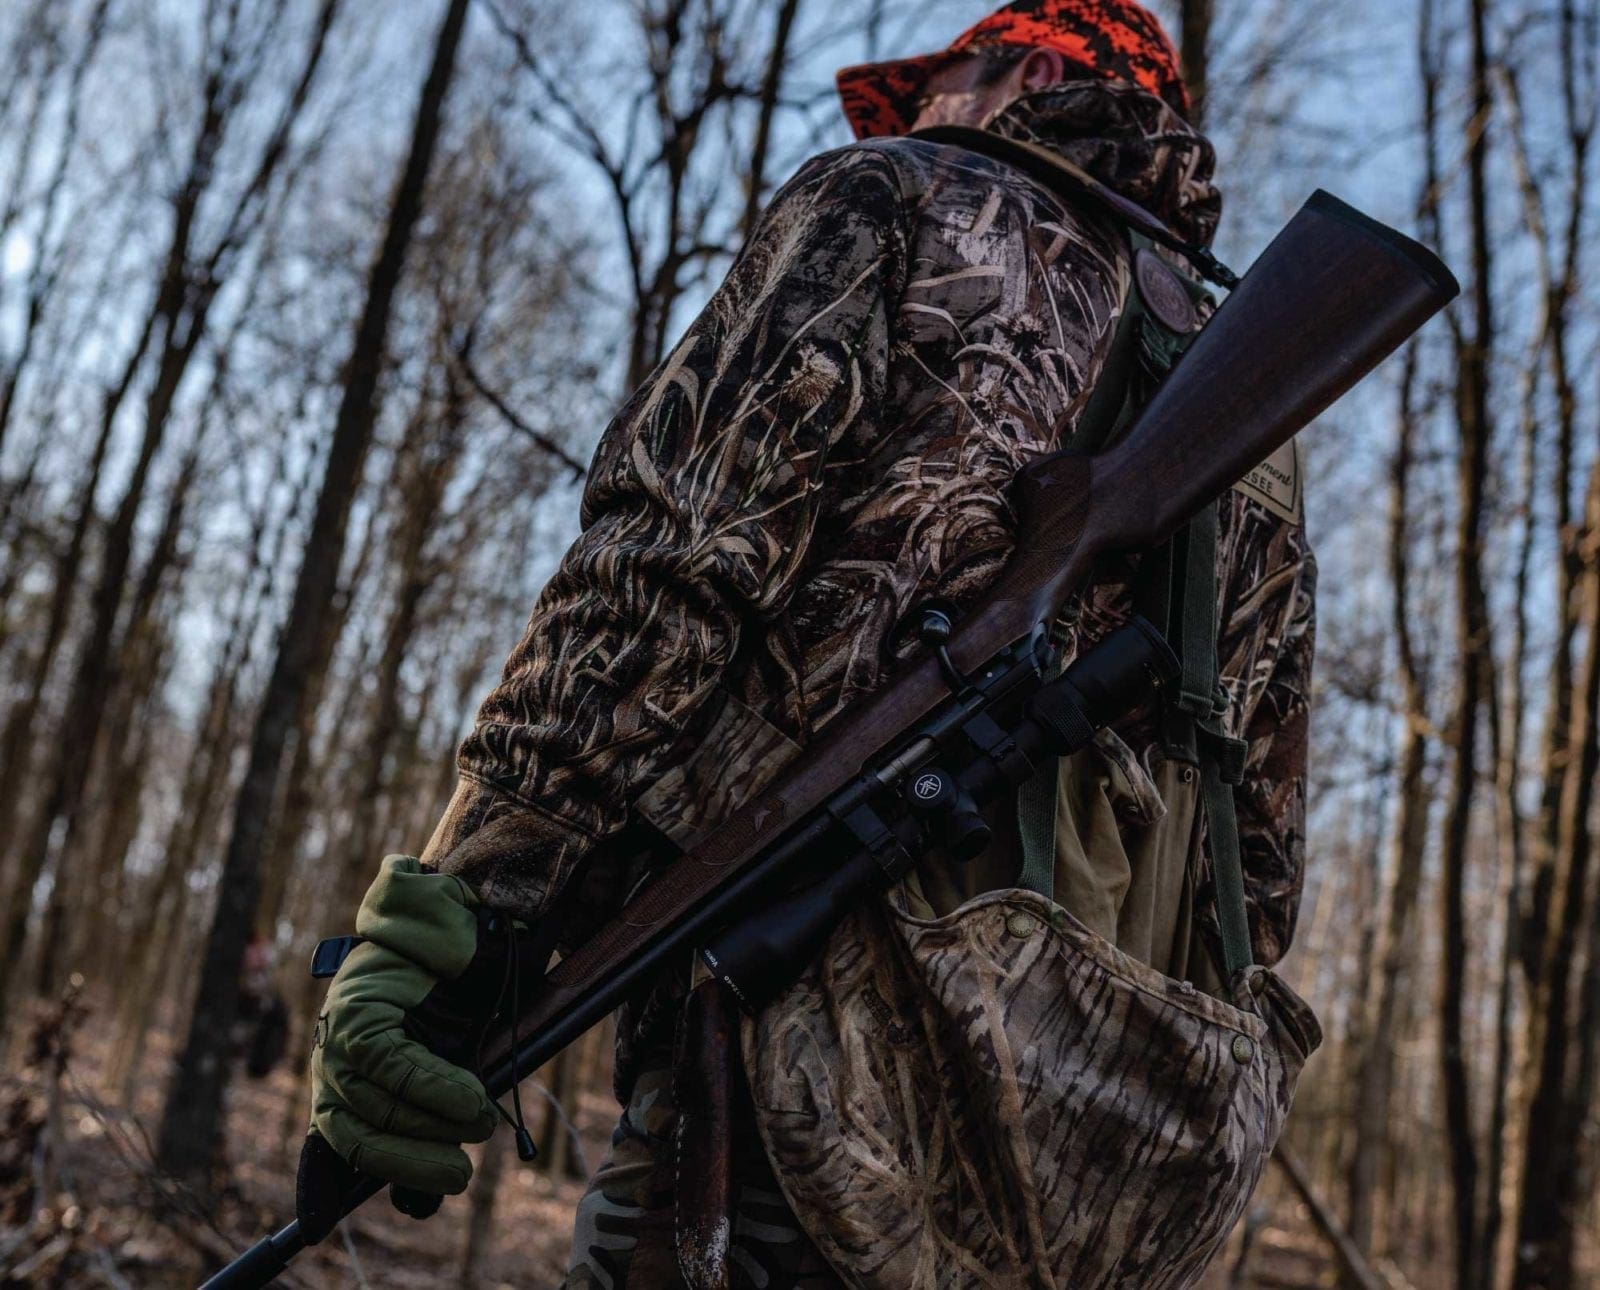 A squirrel hunter stands in the woods with a gun